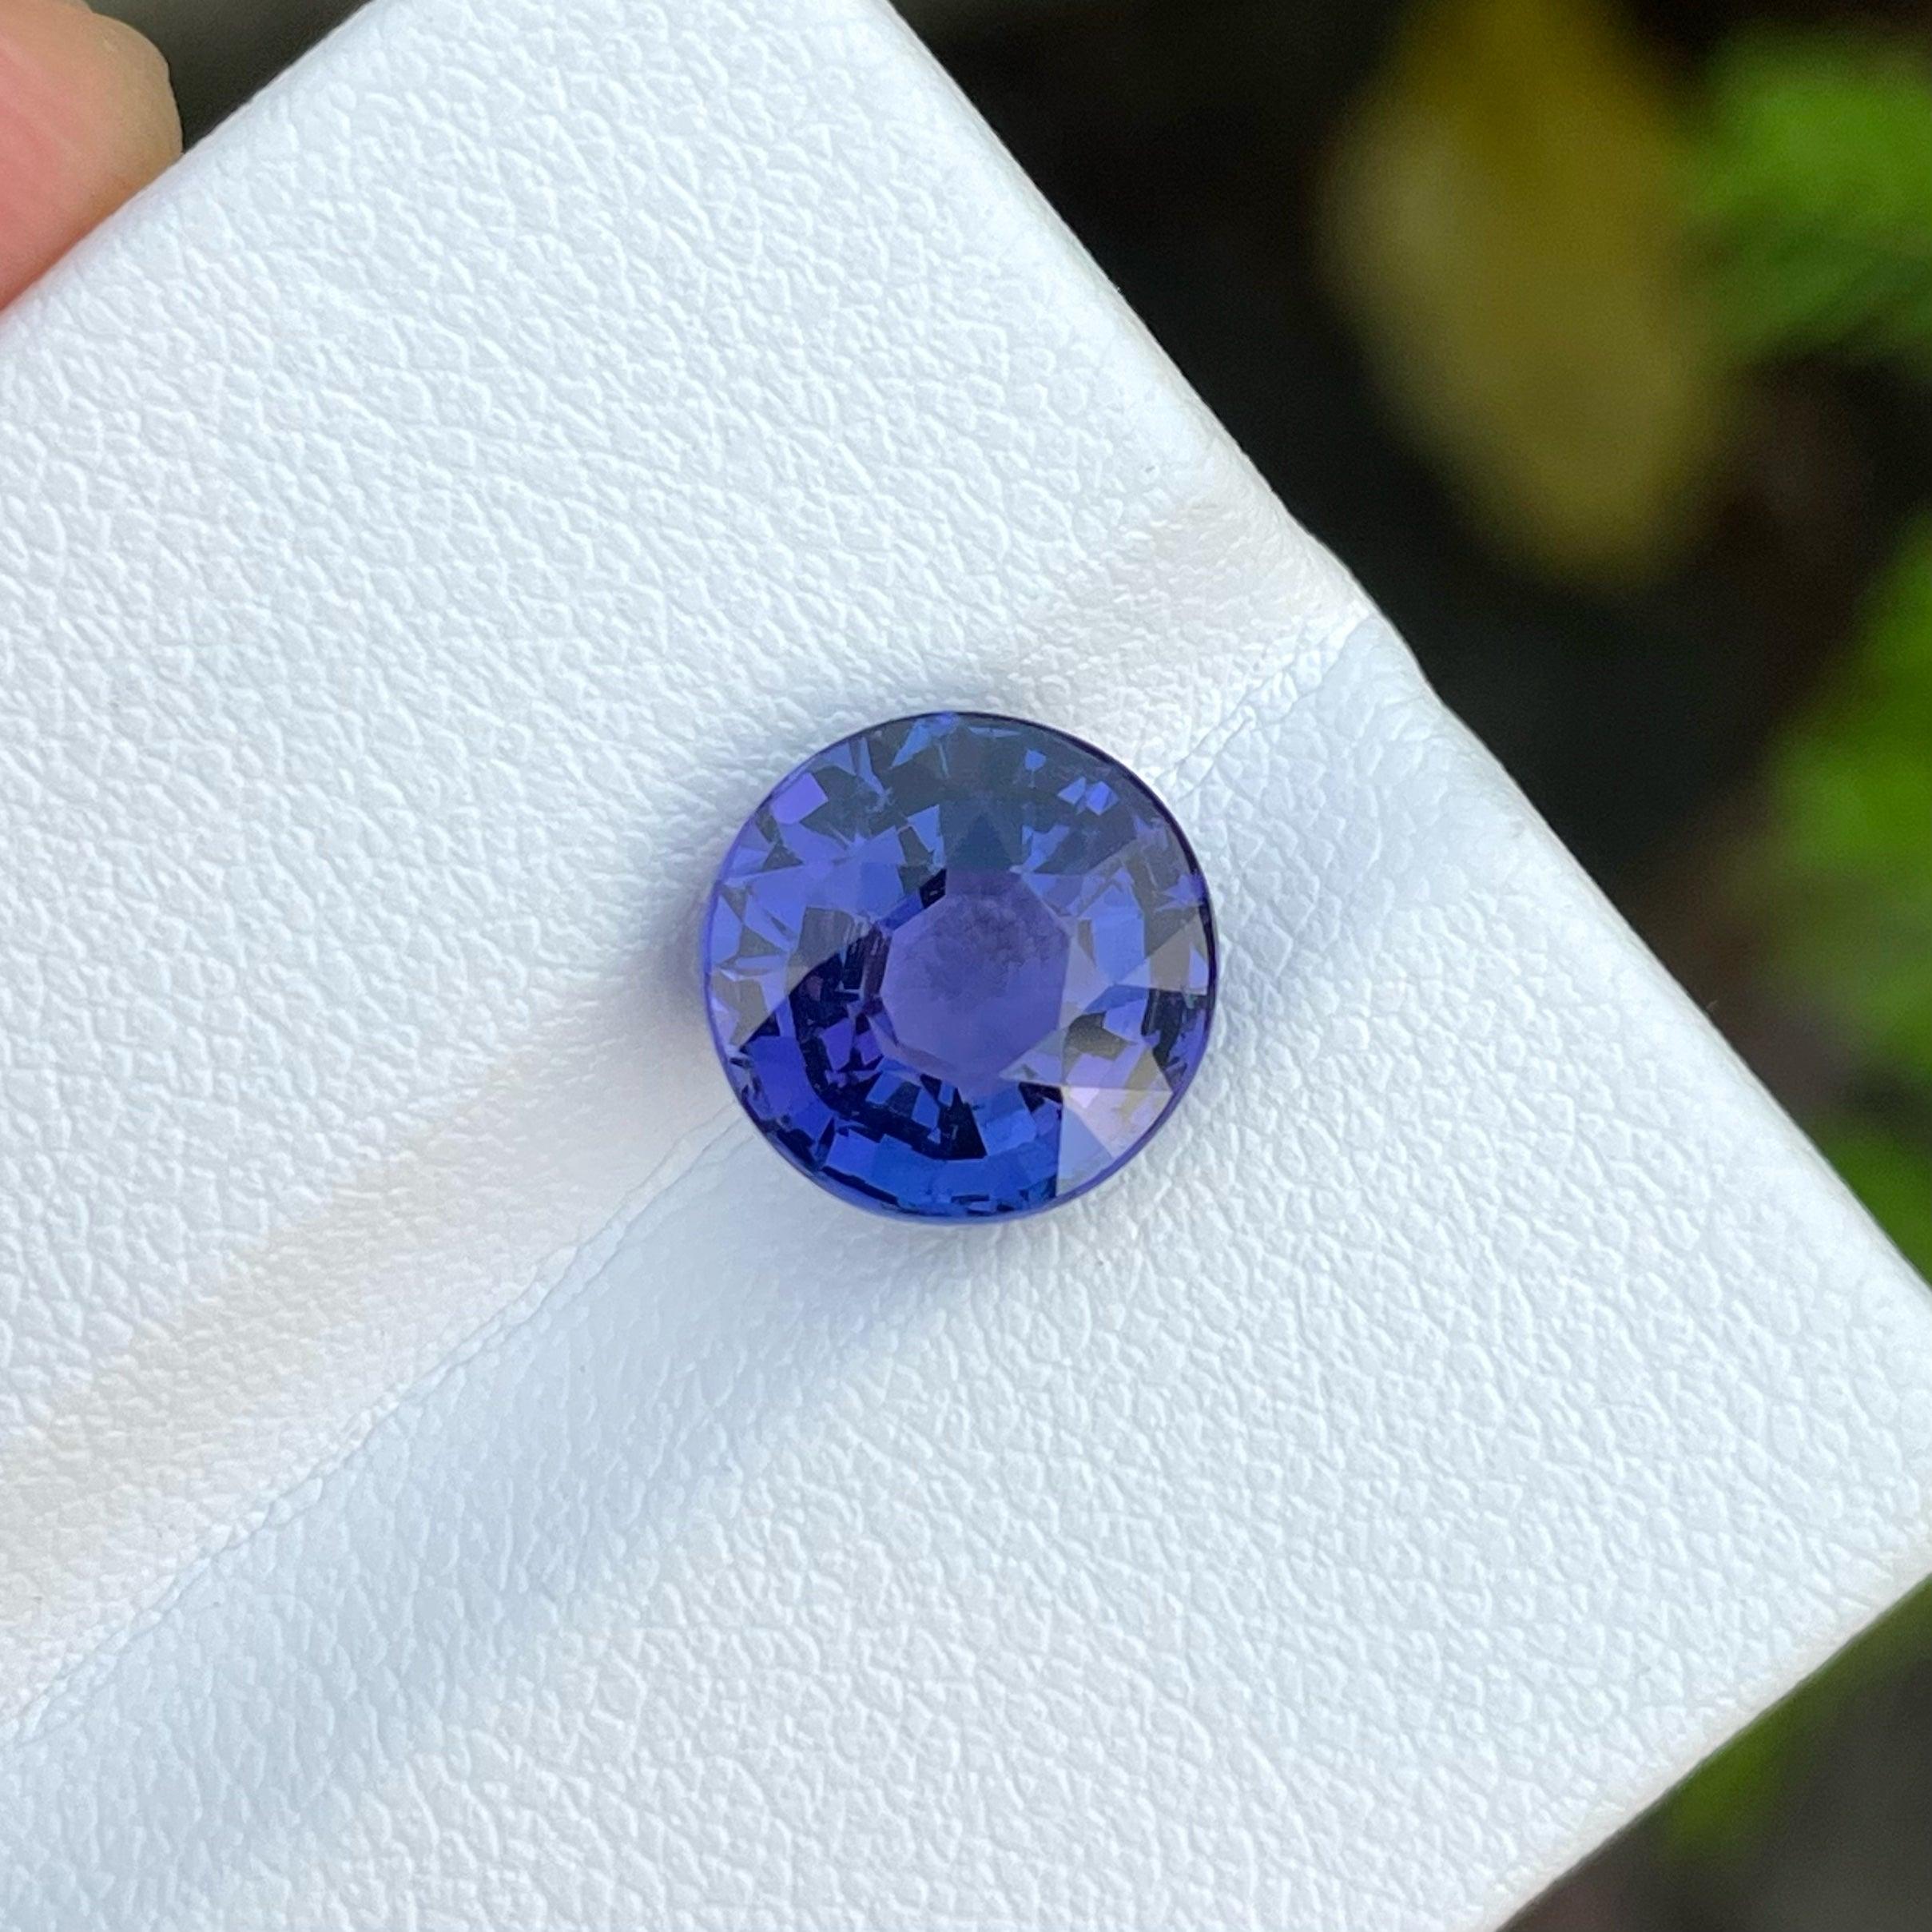 Tanzanite Stone, Available For Sale At Wholesale Price Natural High Quality 4.15 Carats Loupe Clean Clarity Loose Tanzanite Stone From Tanzania.

Product Information:
GEMSTONE TYPE:	Natural 3A Quality Tanzanite Gemstone
WEIGHT:	4.15